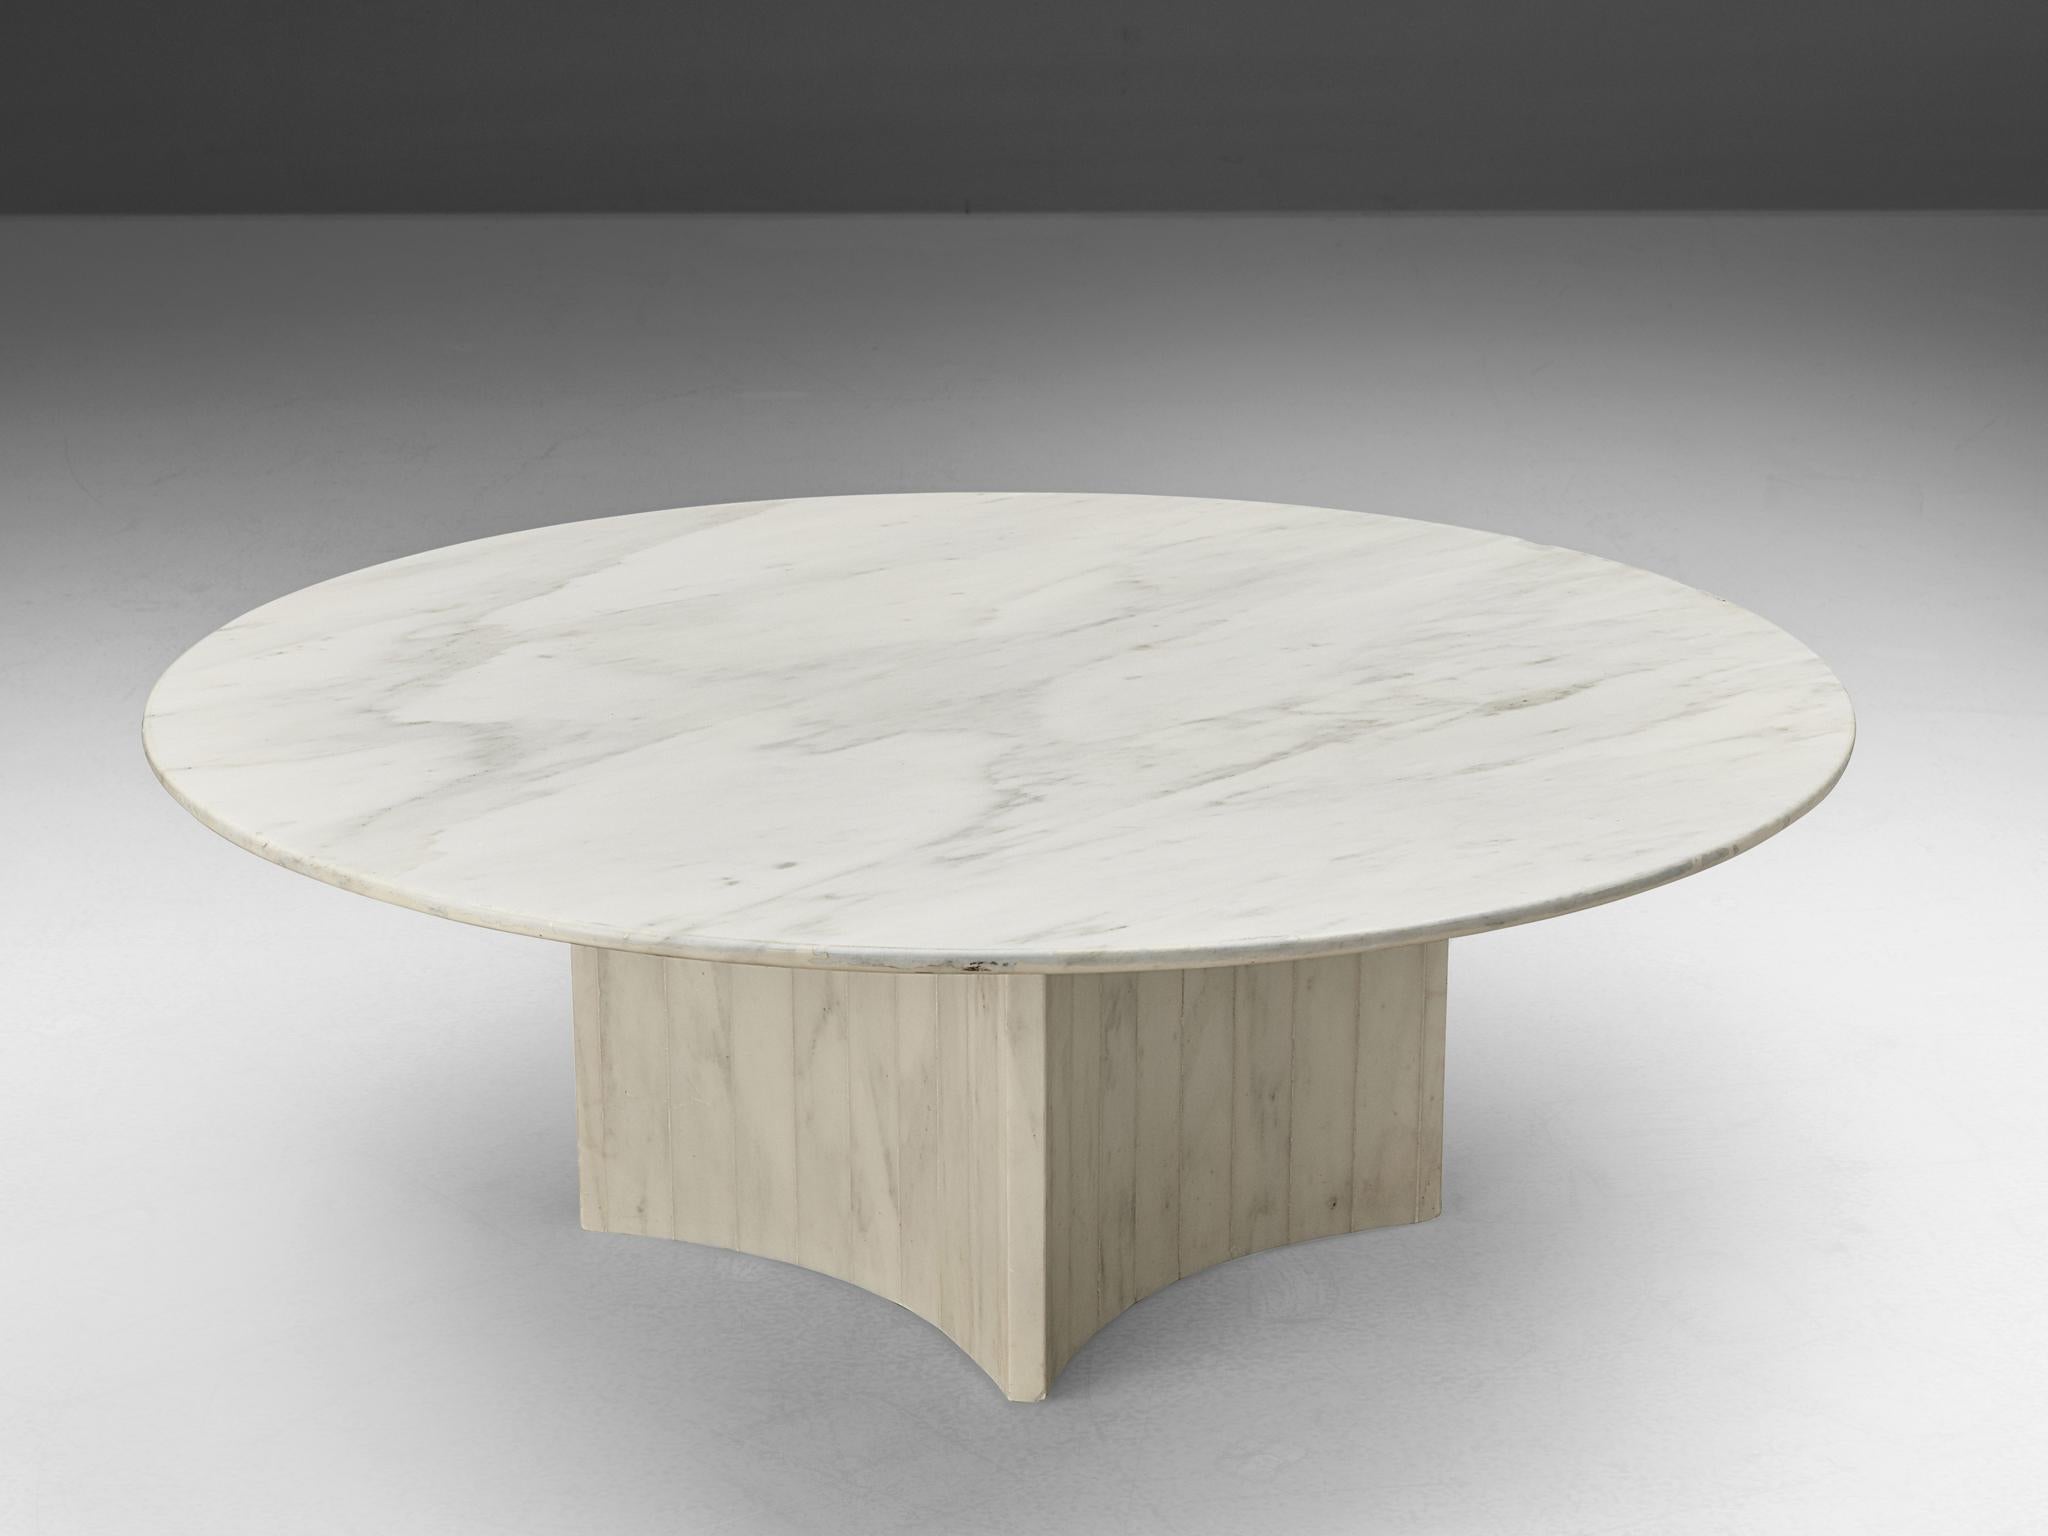 Coffee table, marble, Italy 1970s

This coffee table features a lovely cloud pattern in the marble. The aesthetics are archetypical for postmodern design, with a tasteful contrast between the round tabletop and the fourfold concave base. This